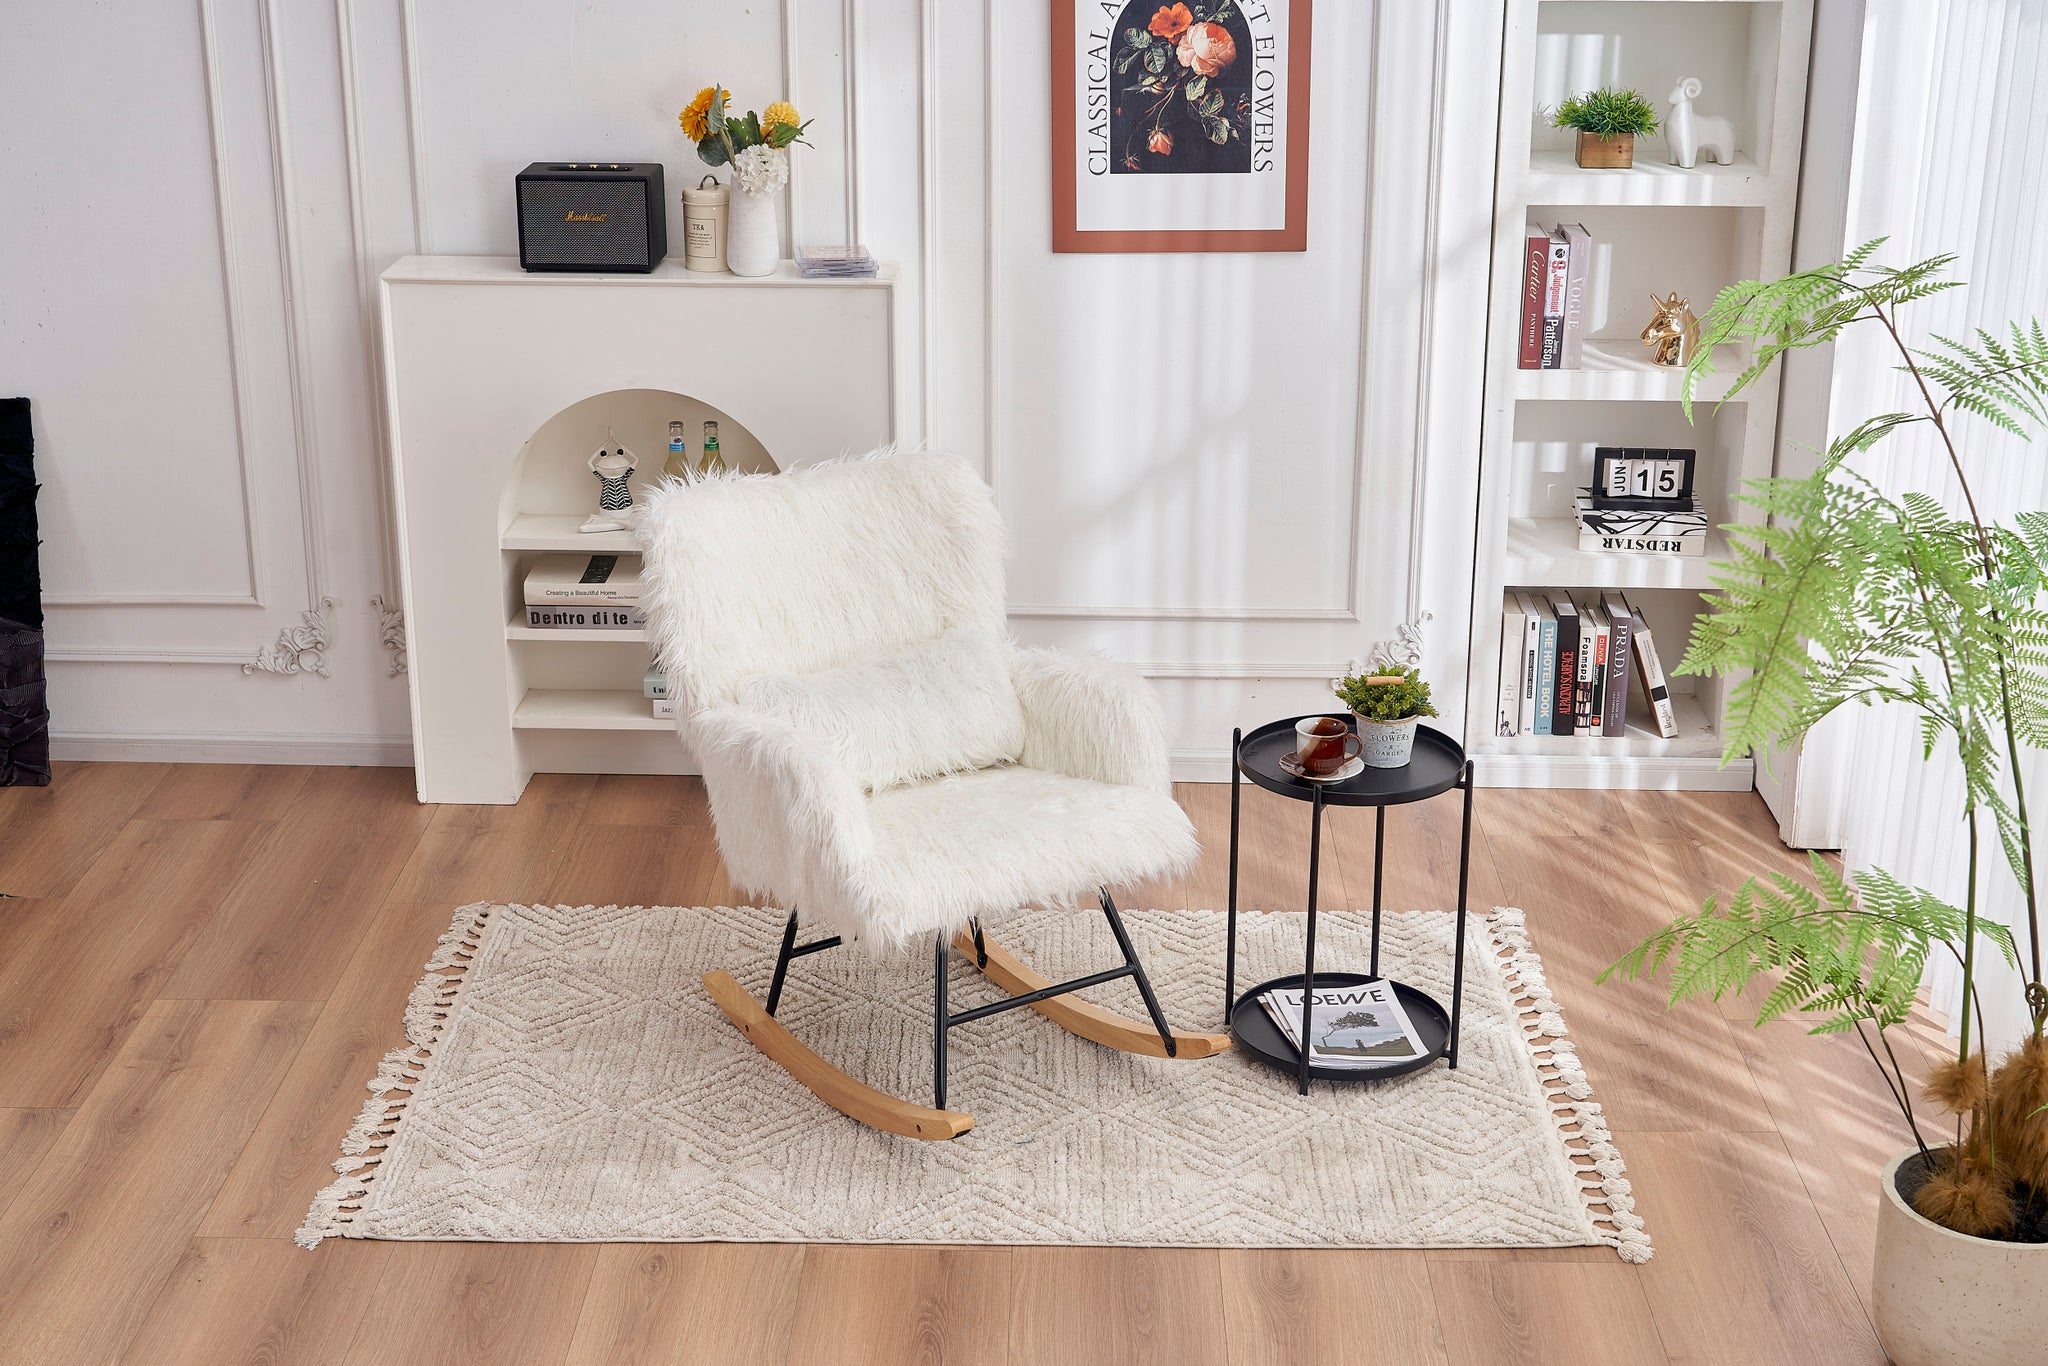 Rocking Chair Nursery, Solid Wood Legs Reading Chair white-primary living space-sponge-modern-rocking